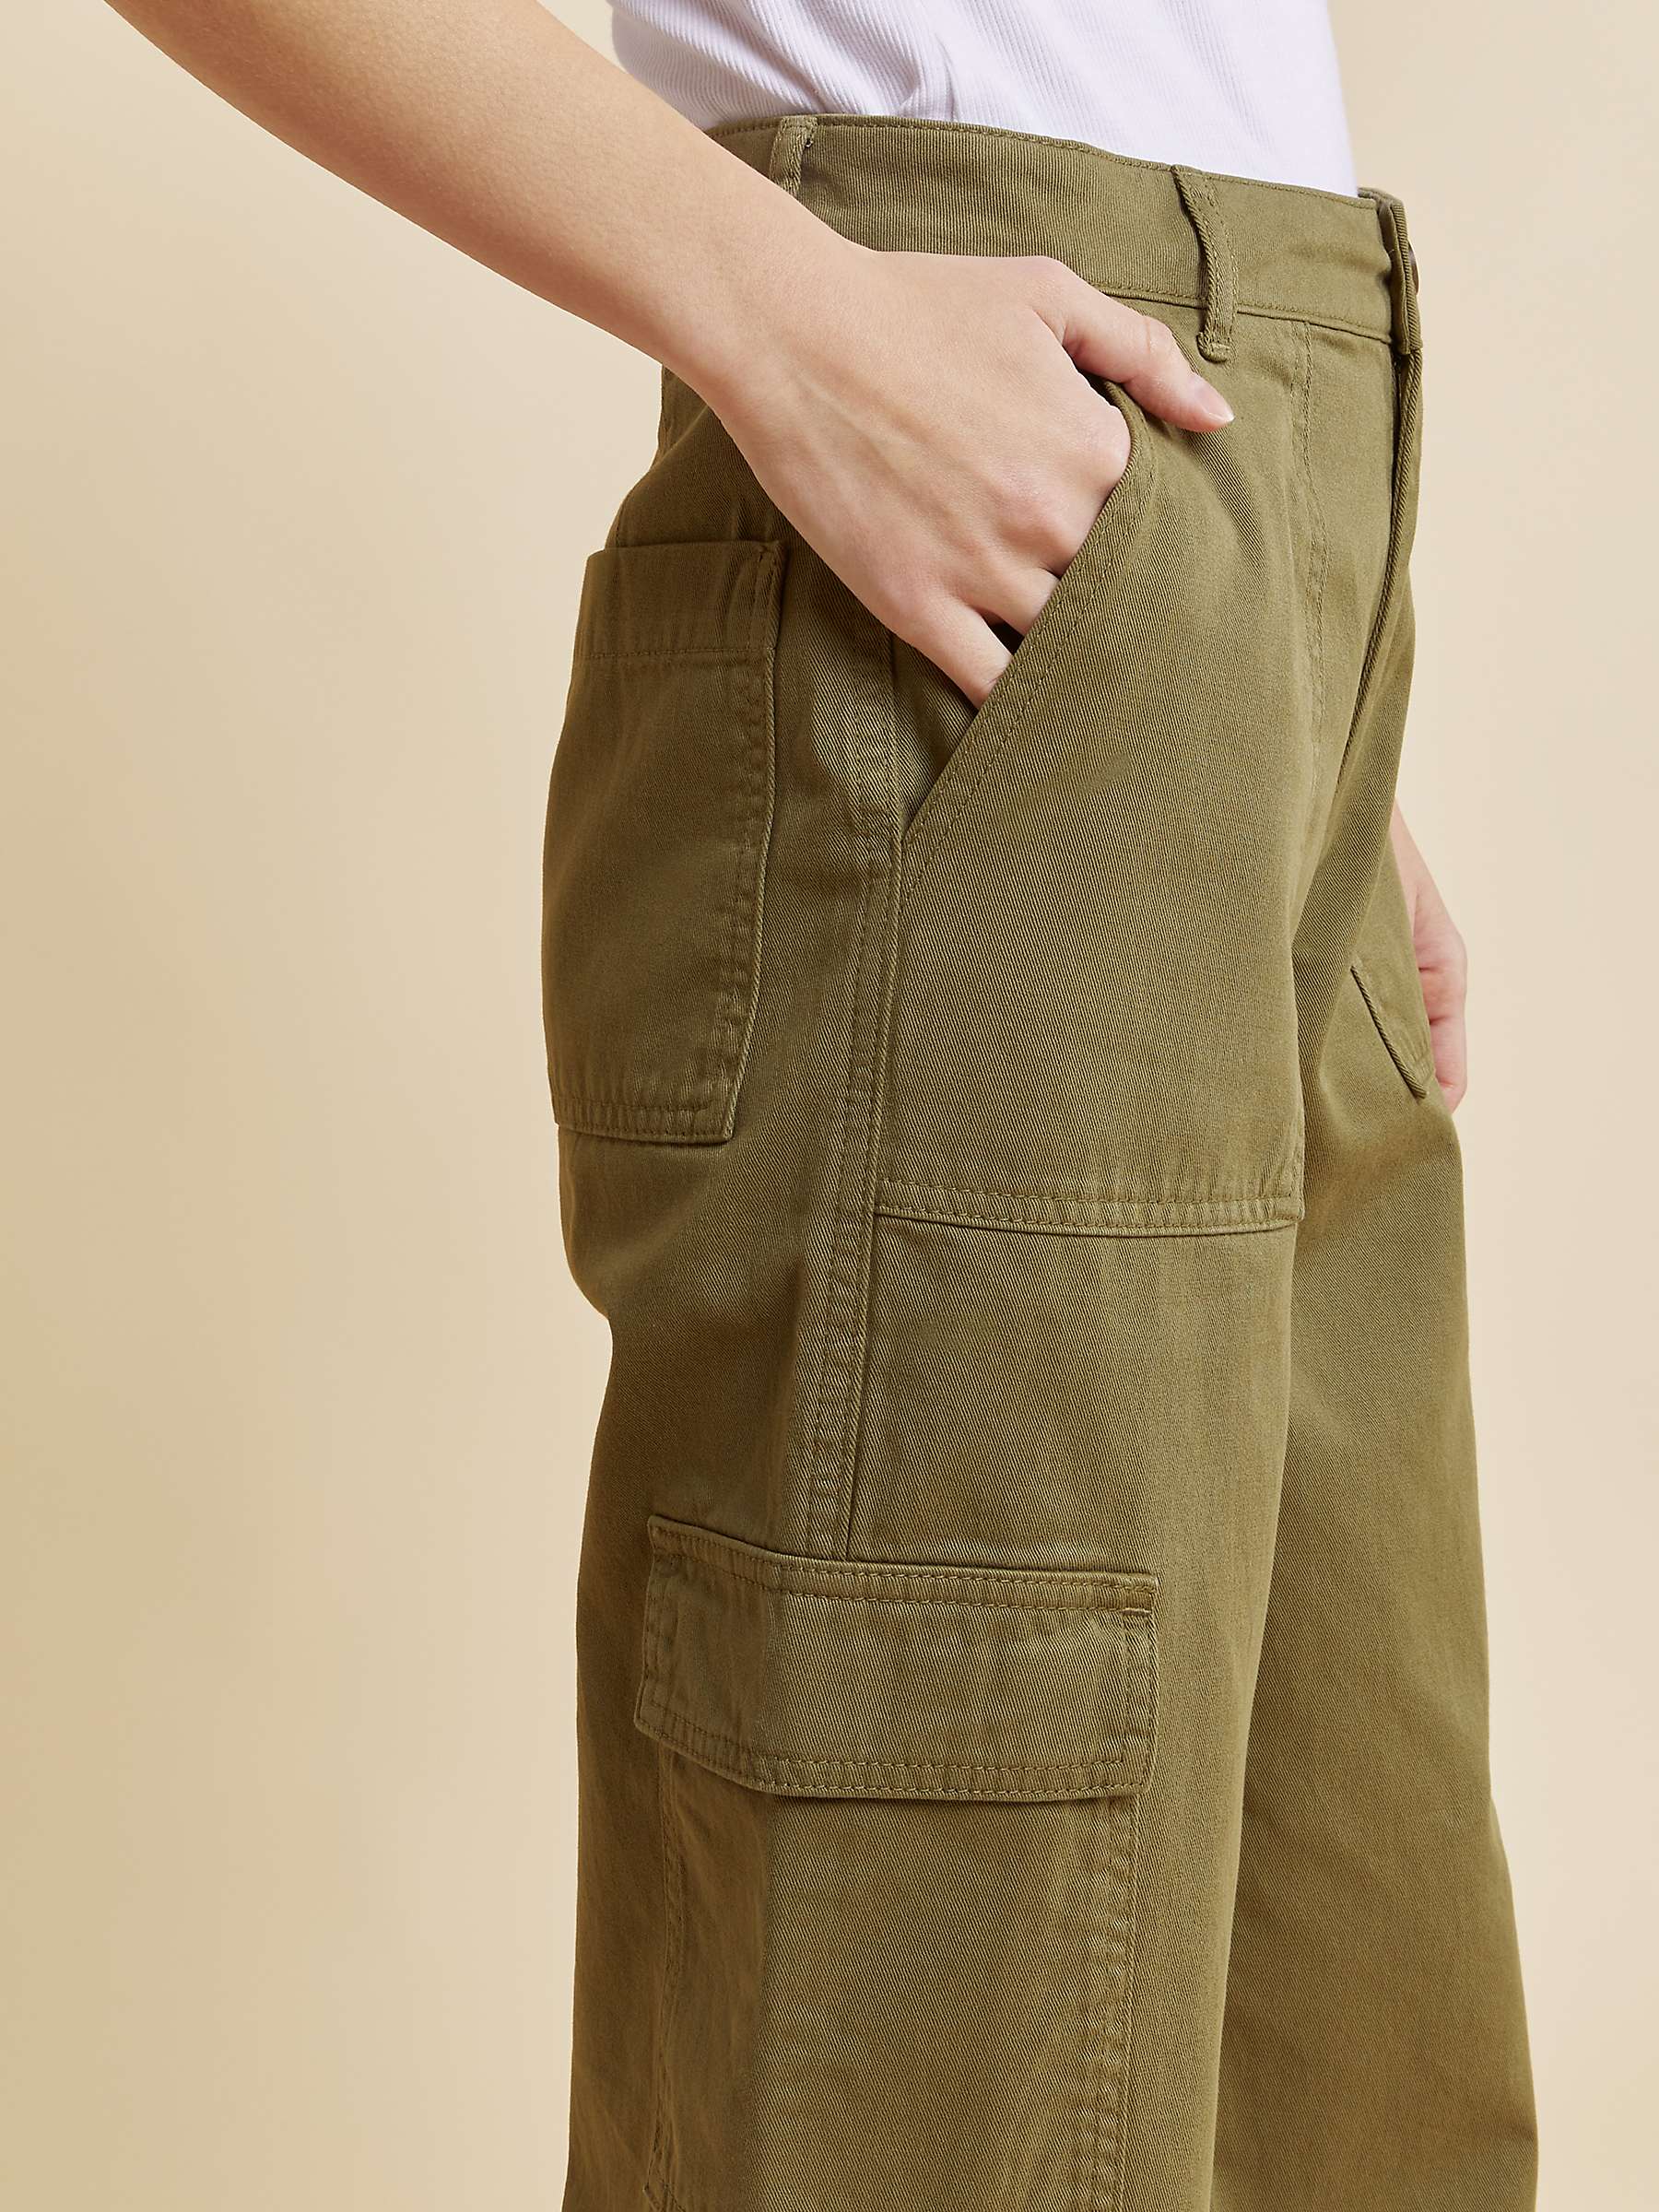 Buy Albaray Military Pocket Organic Cotton Trousers, Olive Online at johnlewis.com